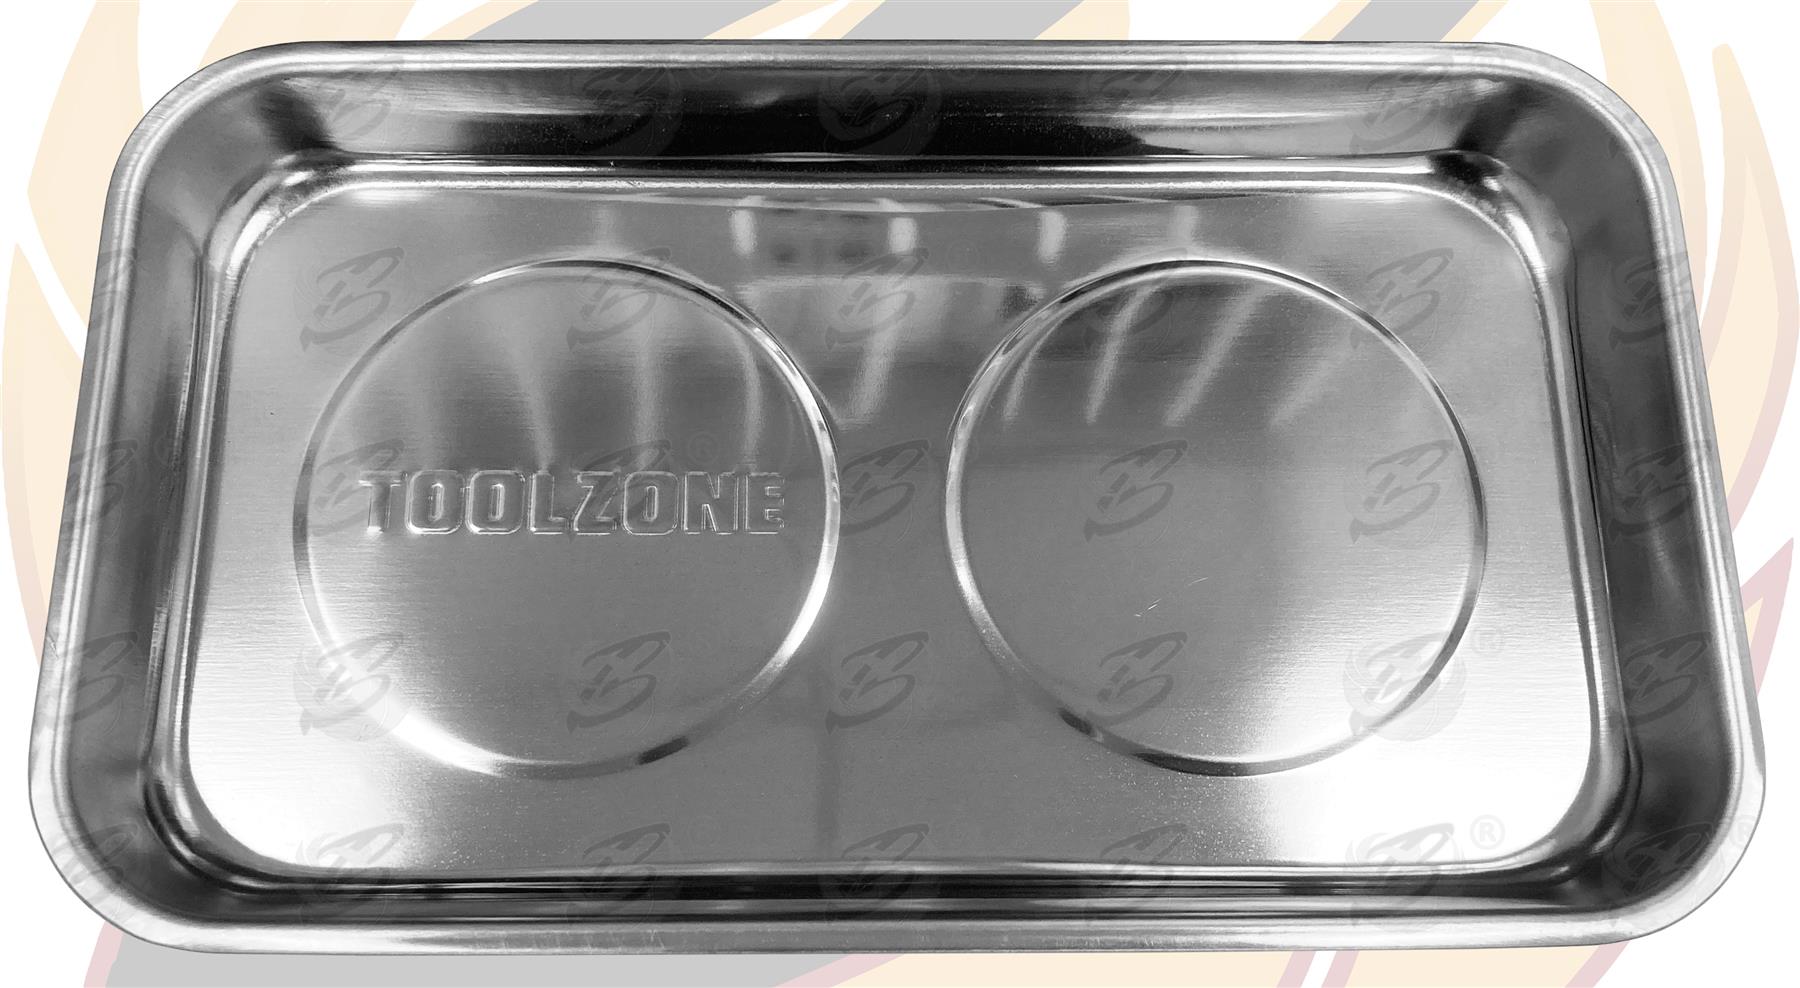 TOOLZONE DOUBLE MAGNETIC PARTS TRAY